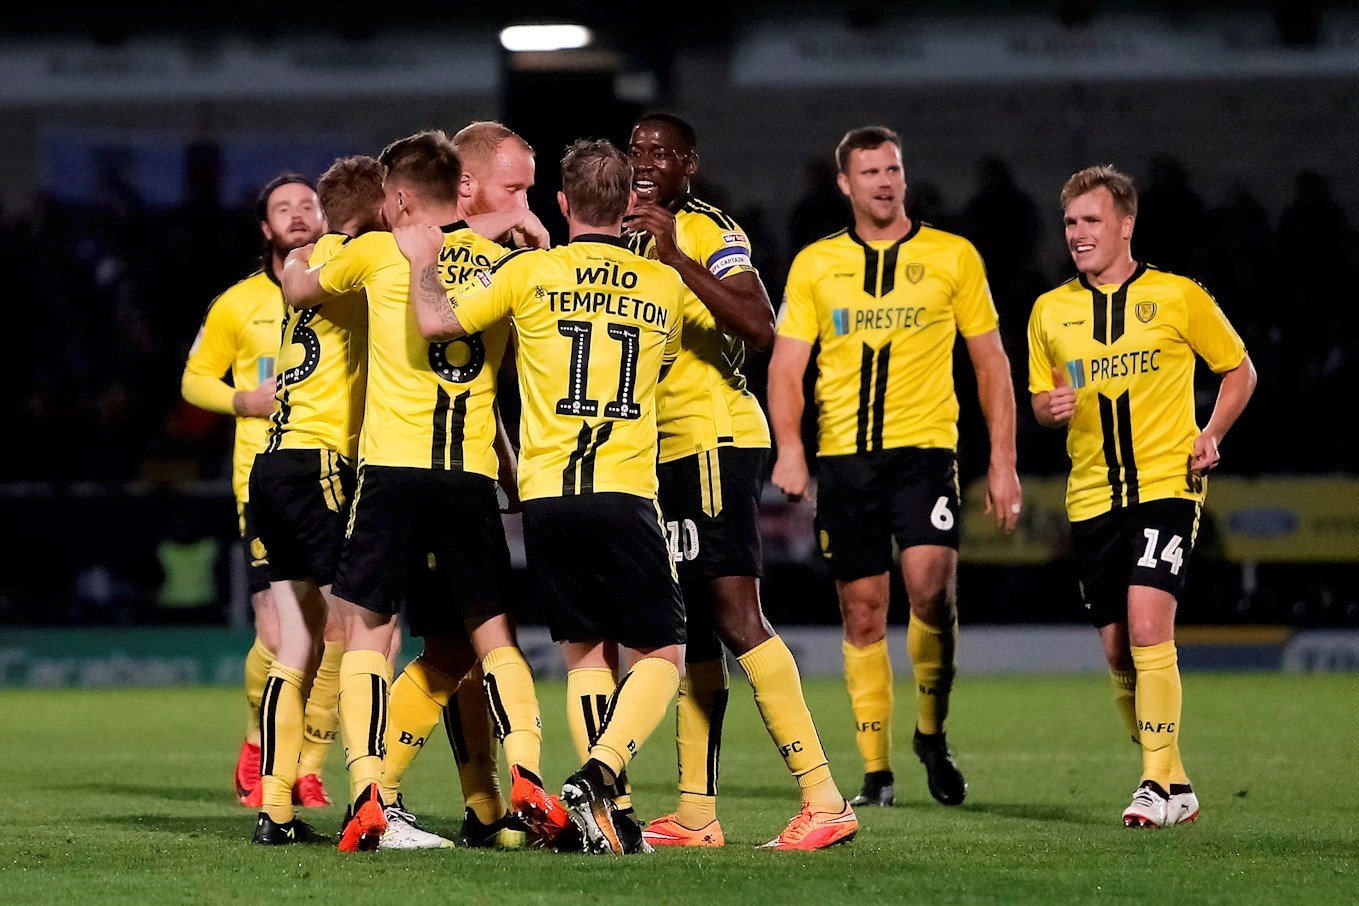 Burton Albion celebrate scoring against Premier League side Burnley in our 2-1 win over the Clarets in the third round of the Carabao Cup